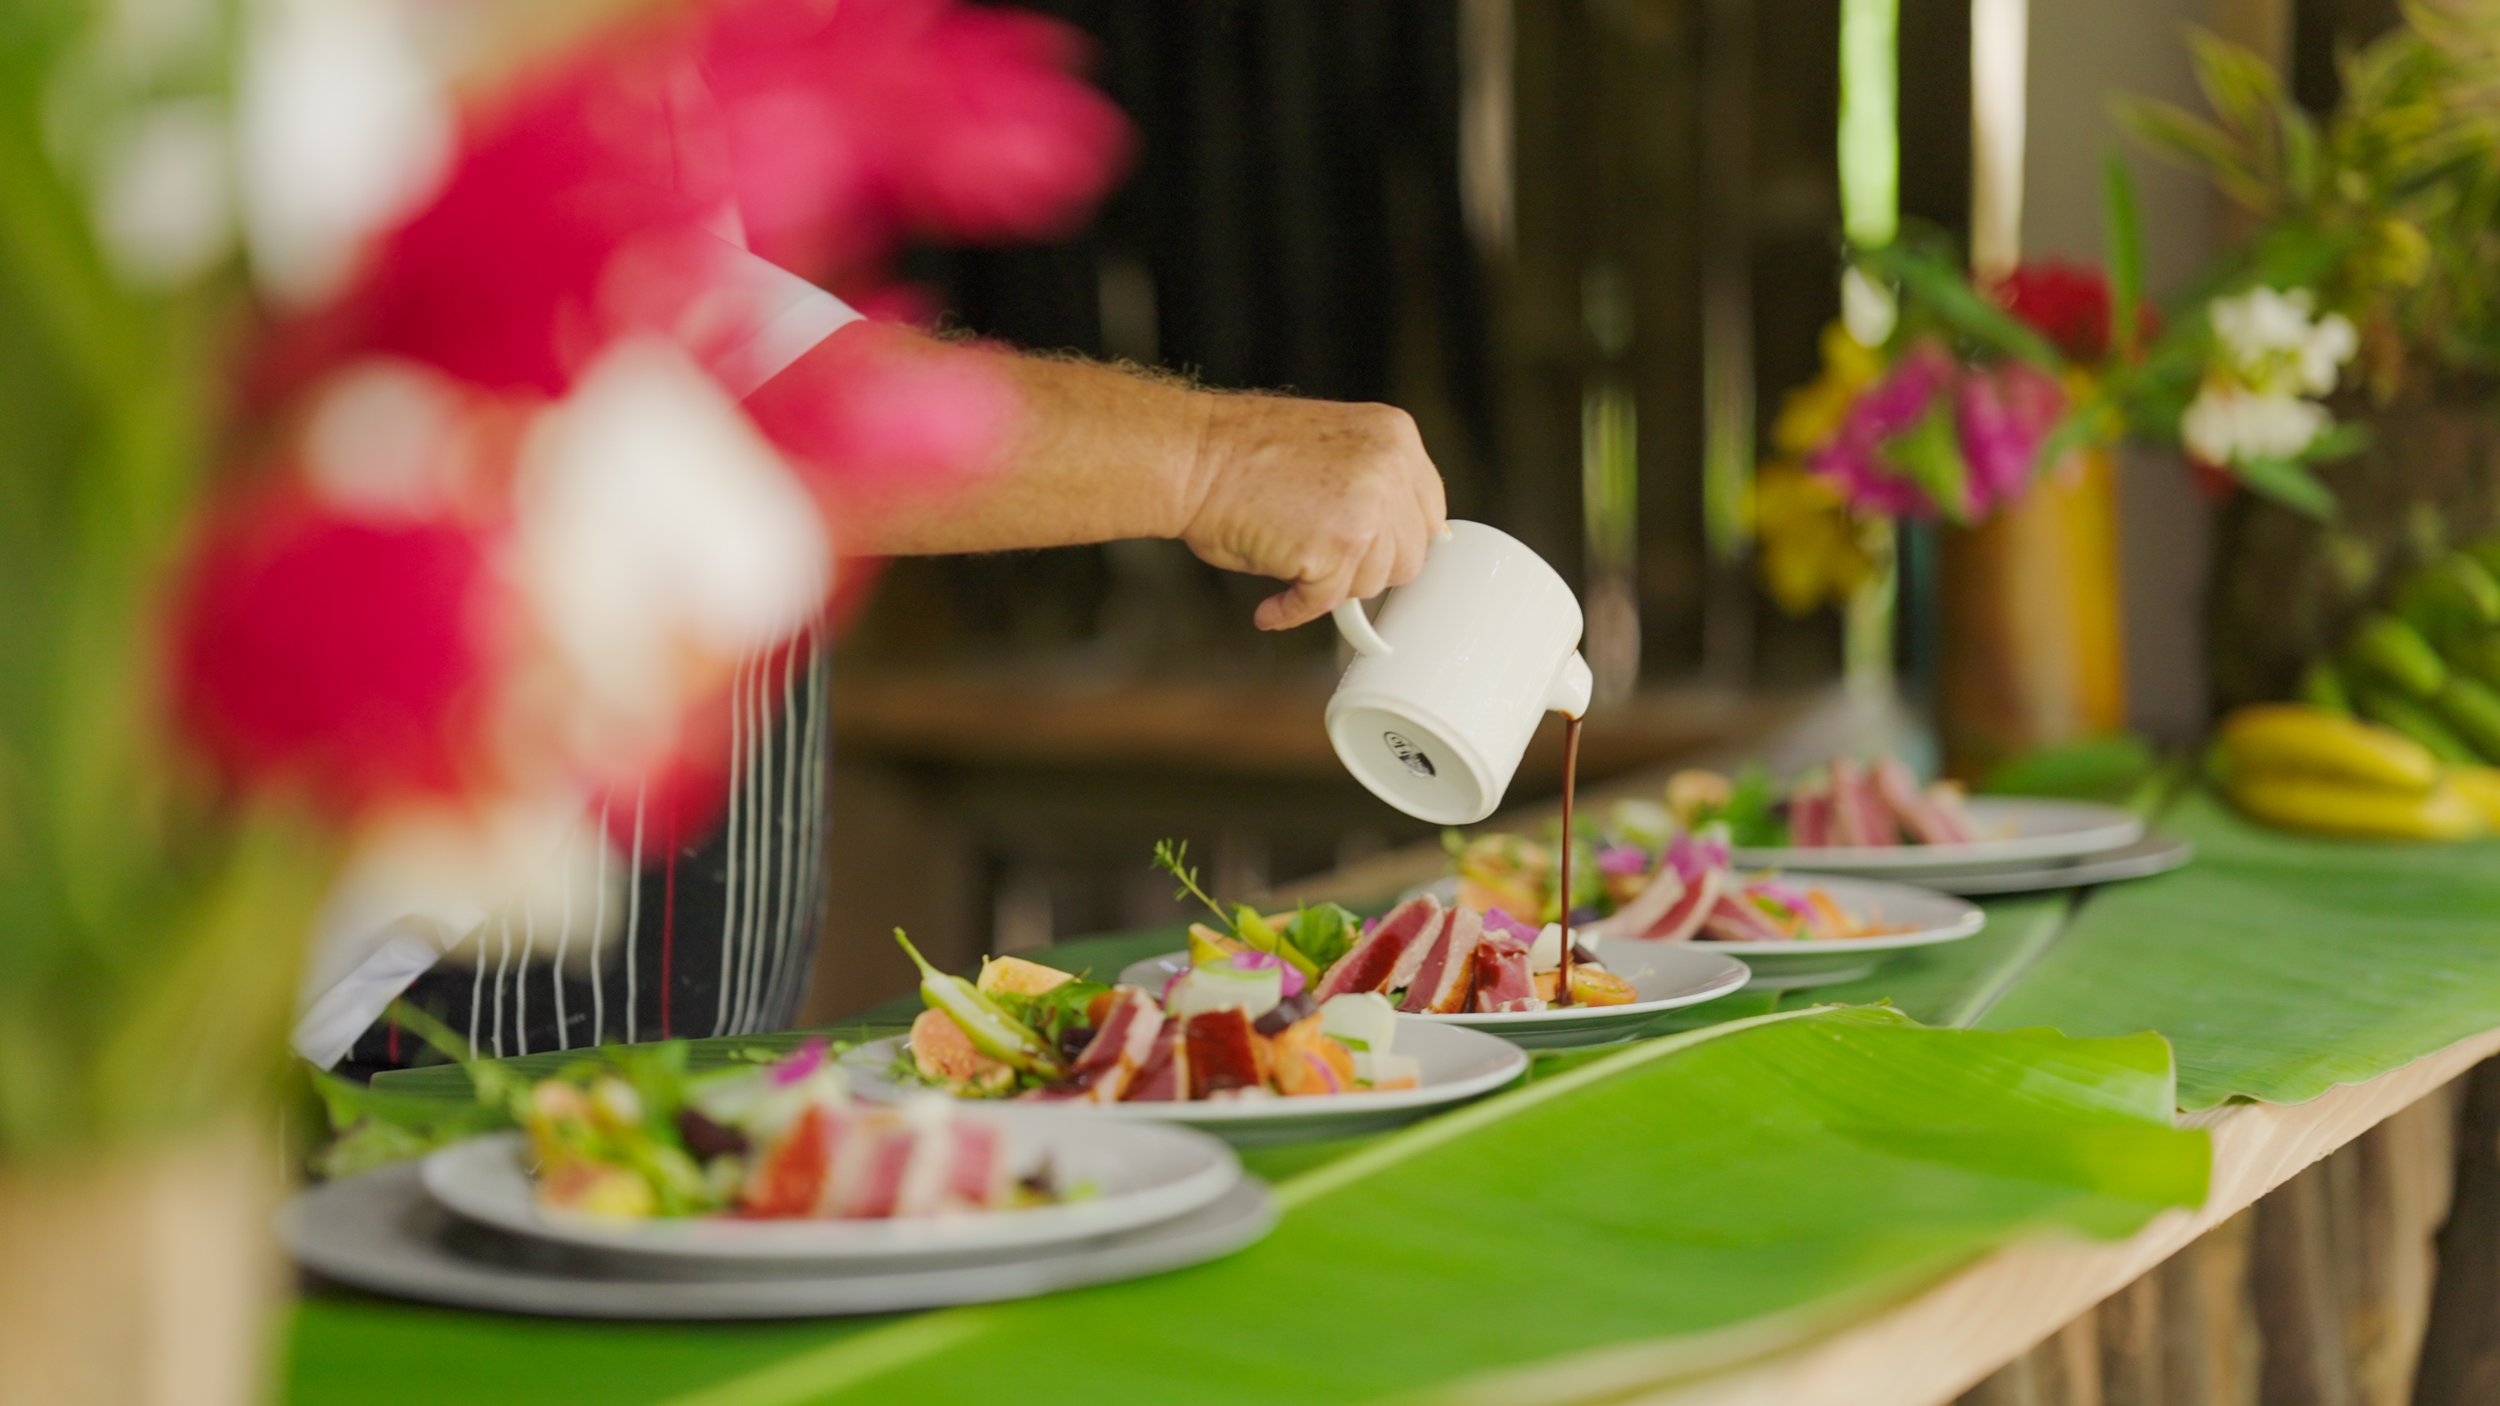 Lunch being prepared from farm-to-fork